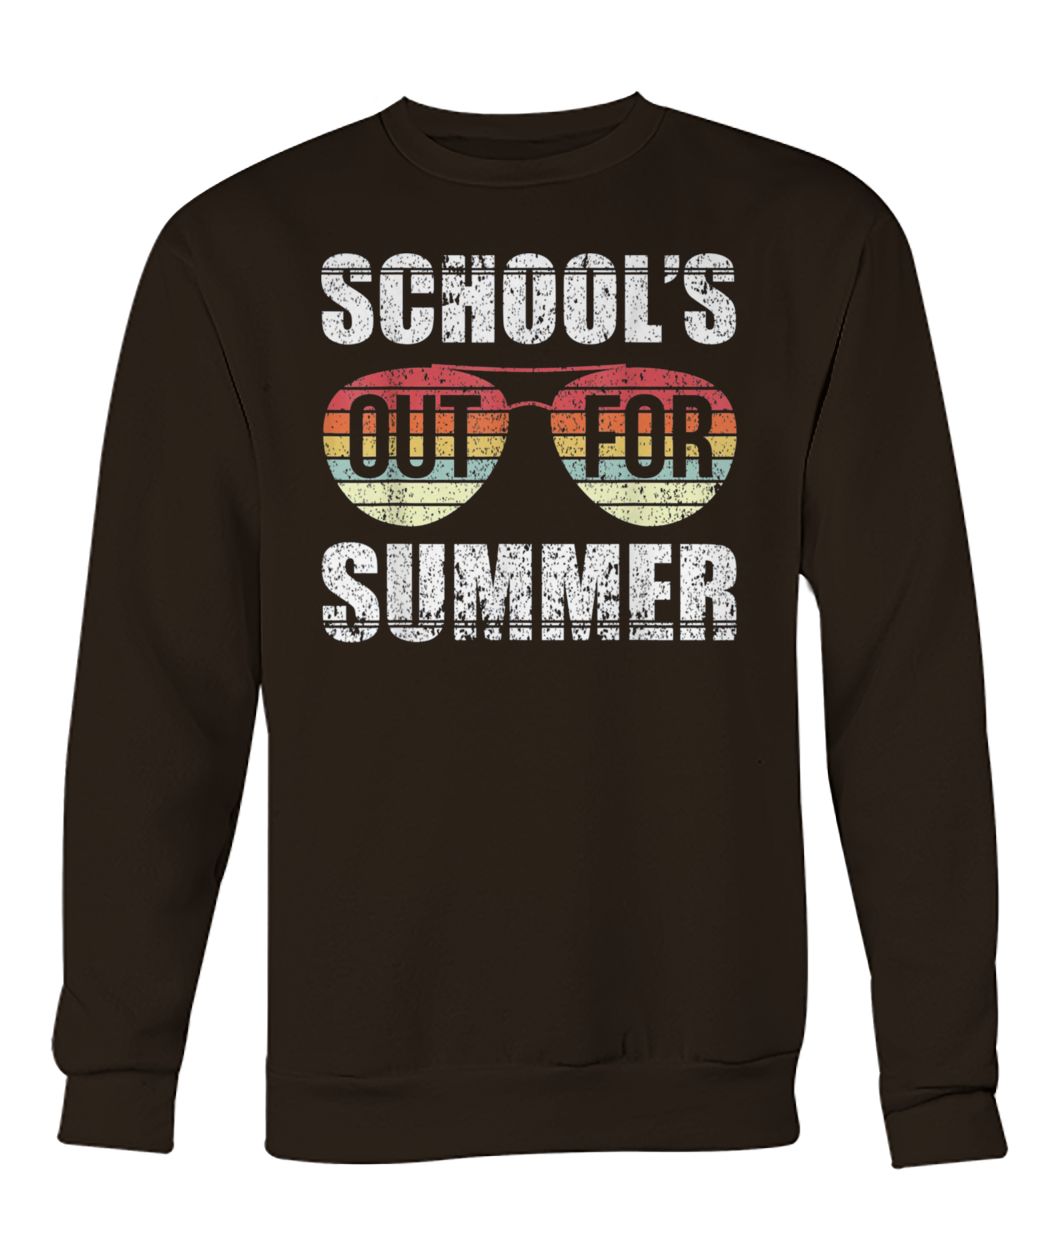 Vintage school's out for the summer crew neck sweatshirt